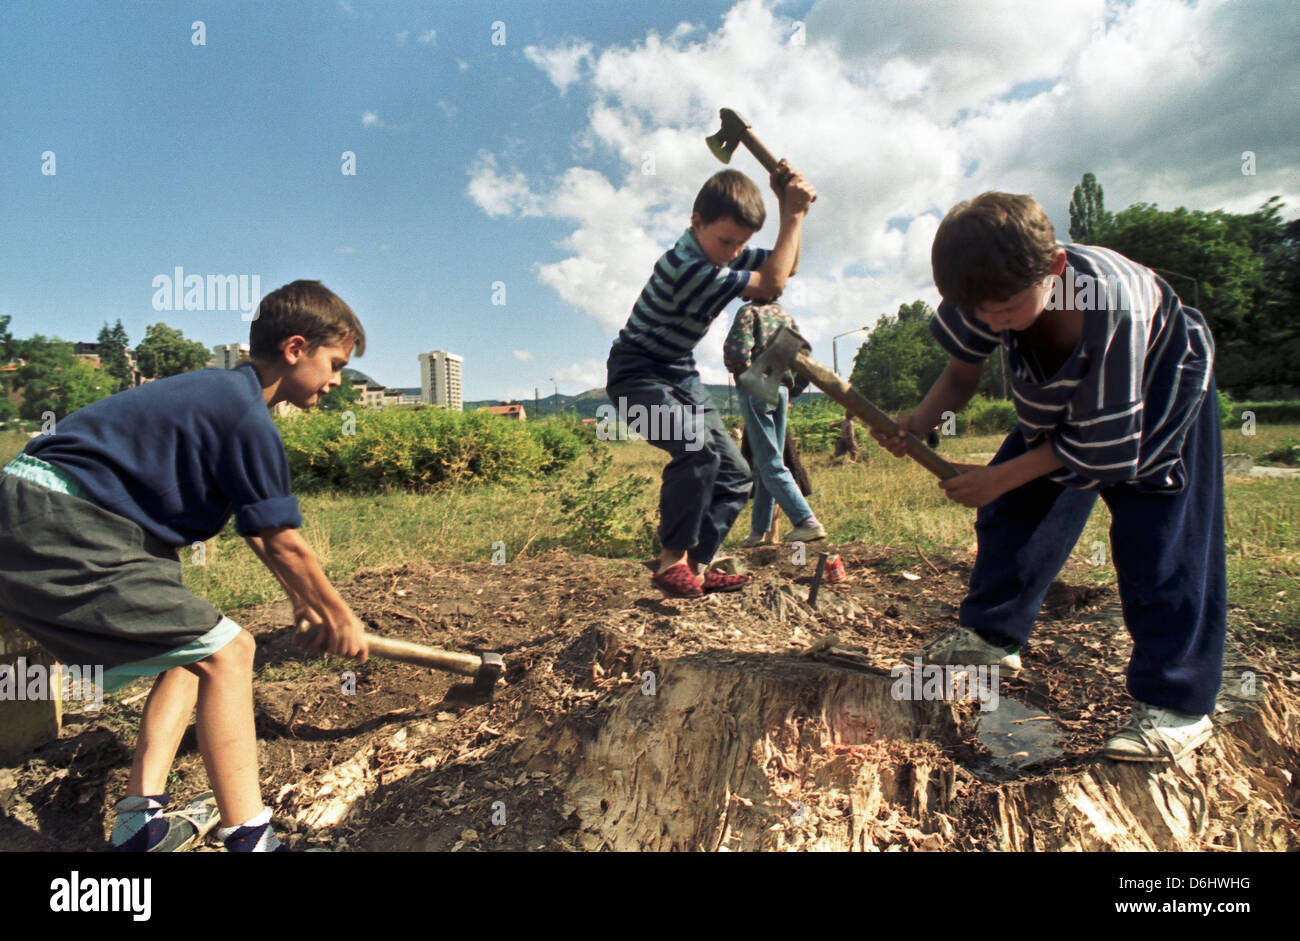 Kids are chipping firewood in the city center, Sarajevo, Bosnia and Herzegovina Stock Photo